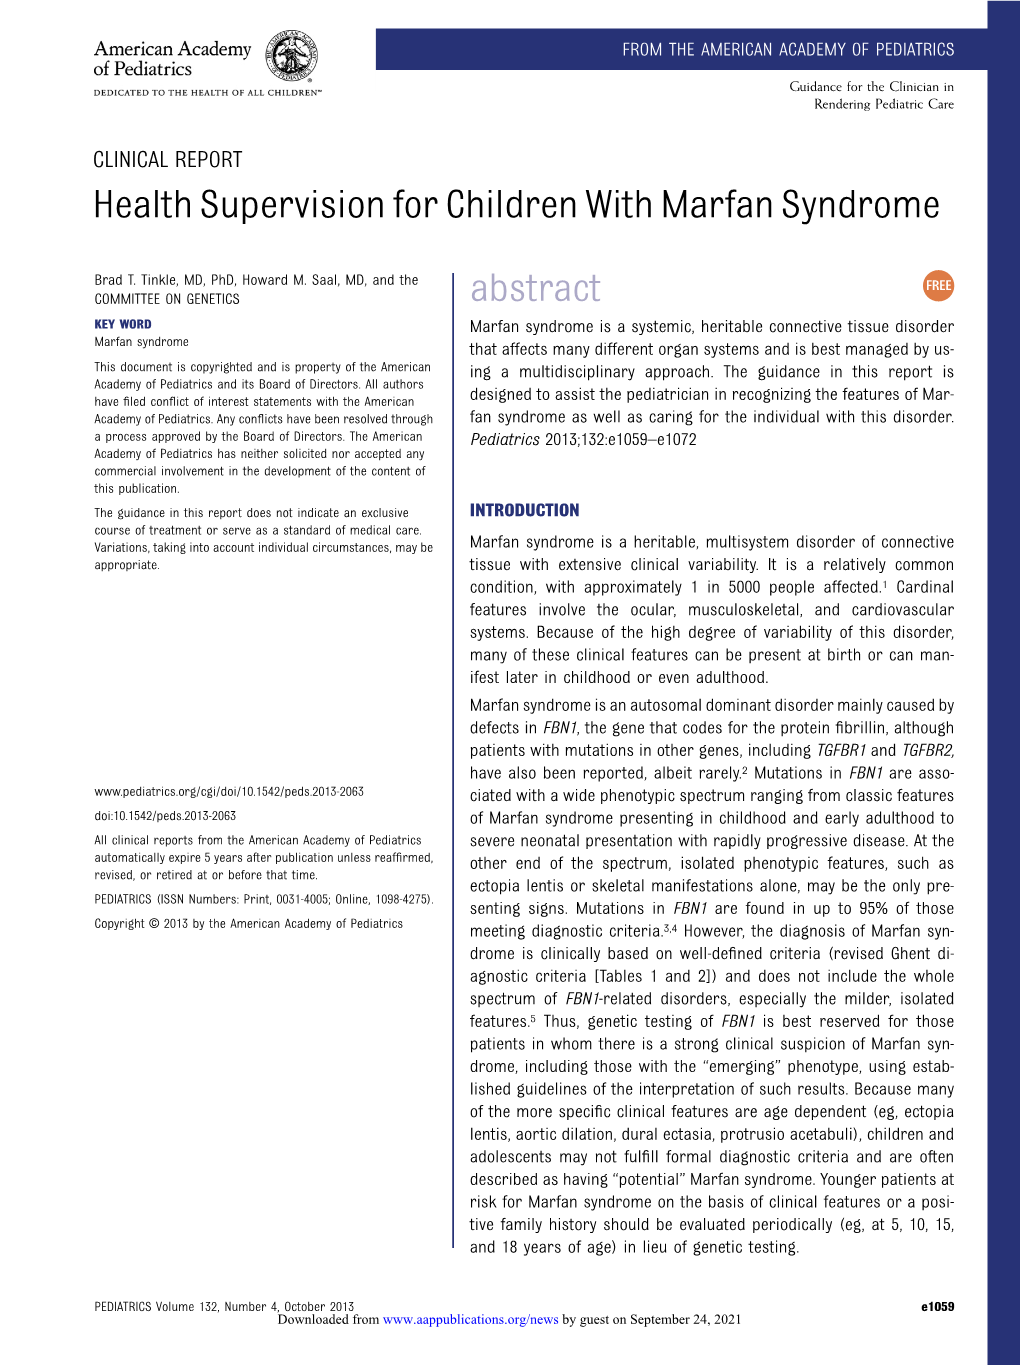 Health Supervision for Children with Marfan Syndrome Abstract